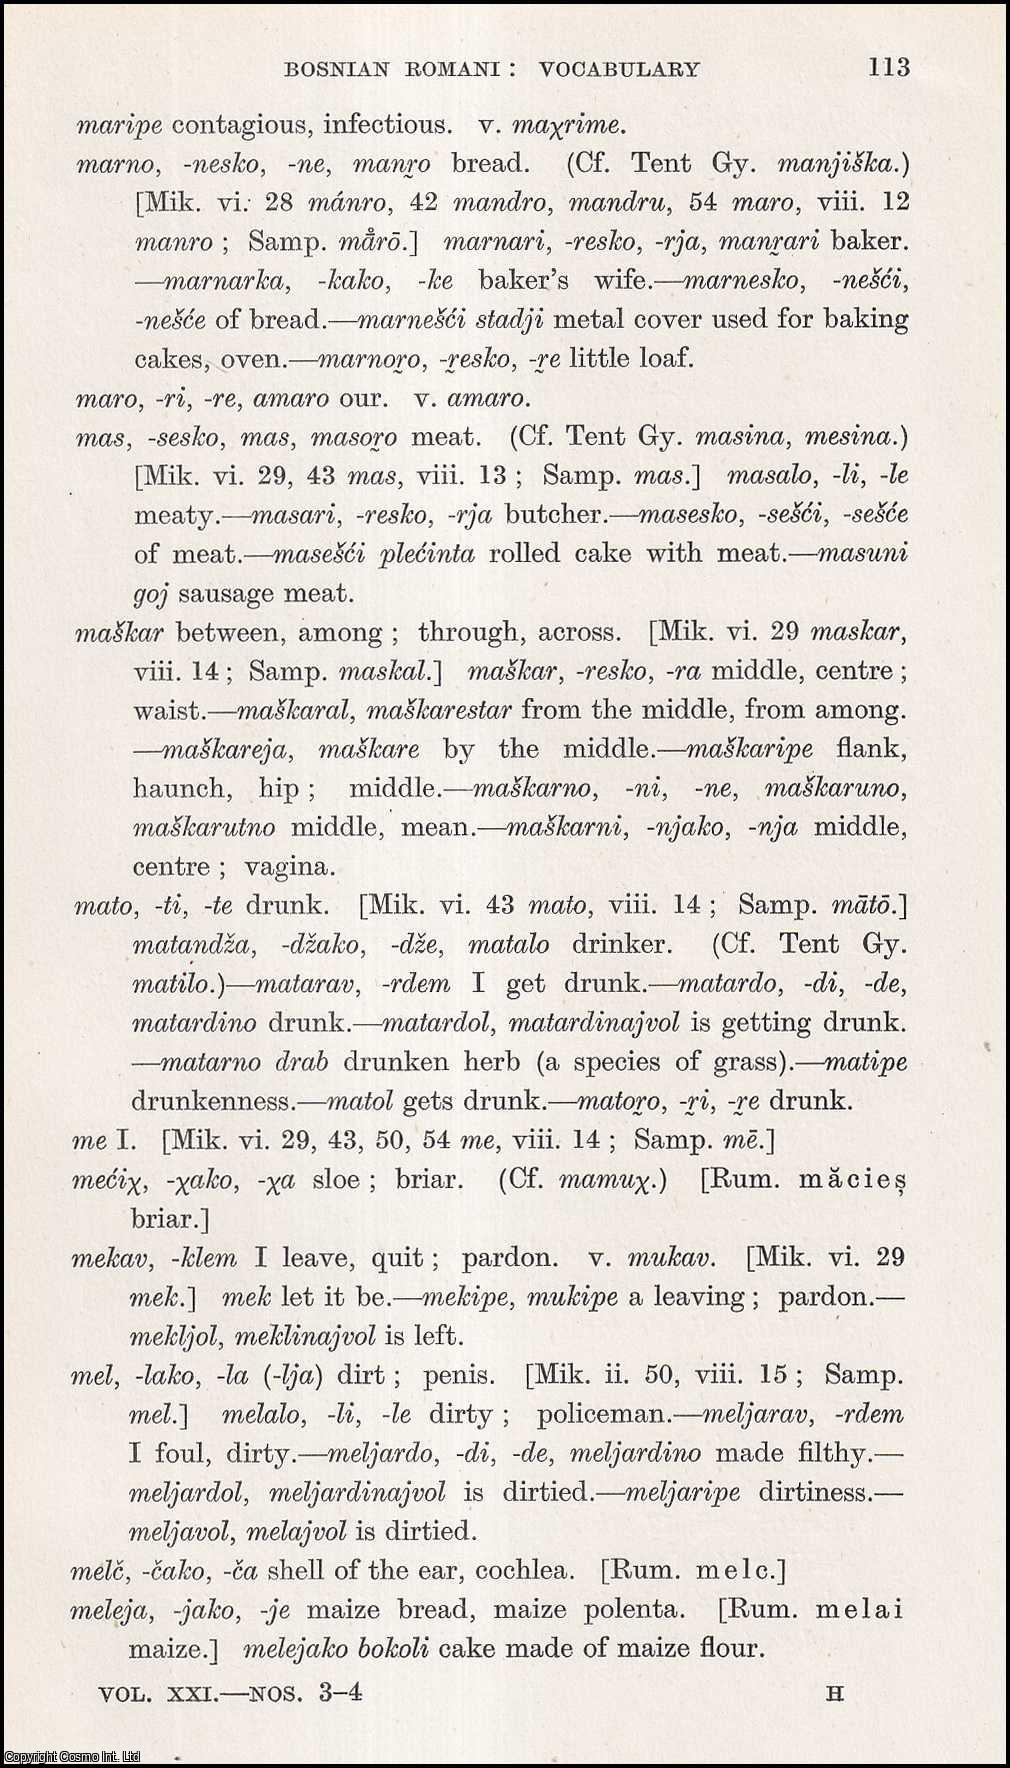 Rade Uhlik - Bosnian Romani: Vocabulary, M-R. An uncommon original article from the Journal of the Gypsy Lore Society, 1942.